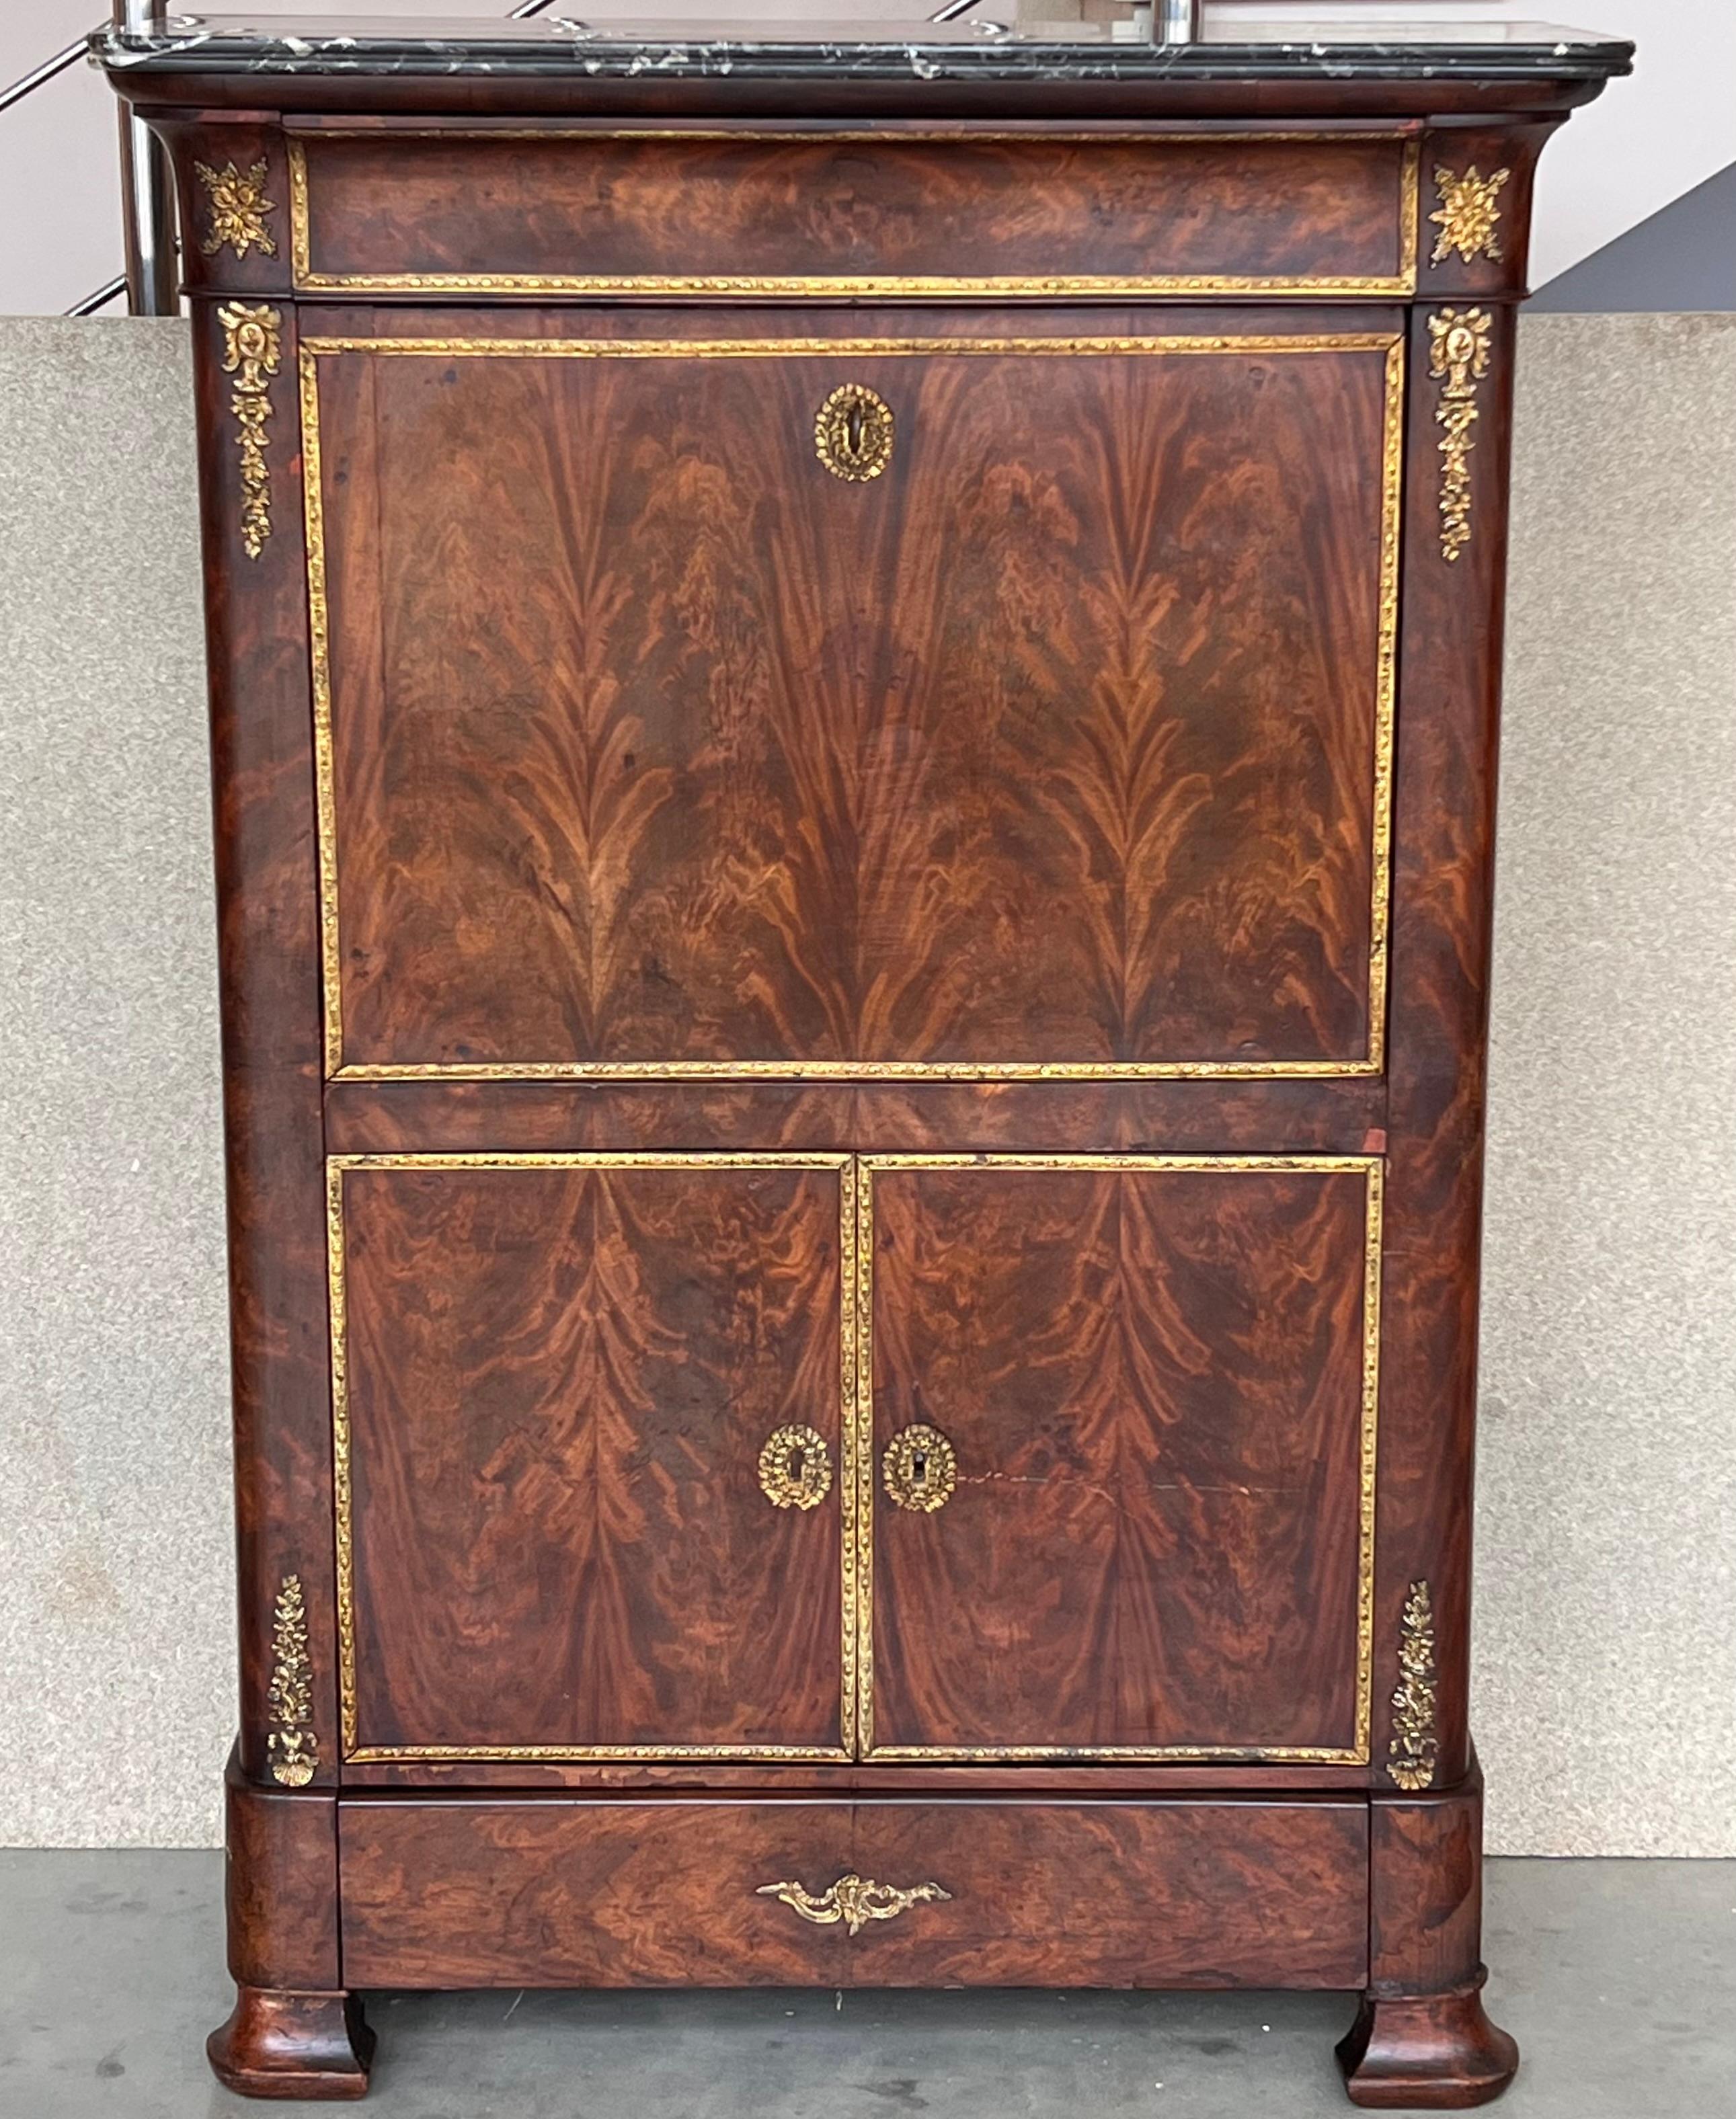 Secretaire a abattant, France circa 1820, Biedermeier period. The outside with fall front and two drawers flanked by two ebonized columns shows a beautiful oak veneer design. The wood veneered inside opens to a central compartment flanked by six